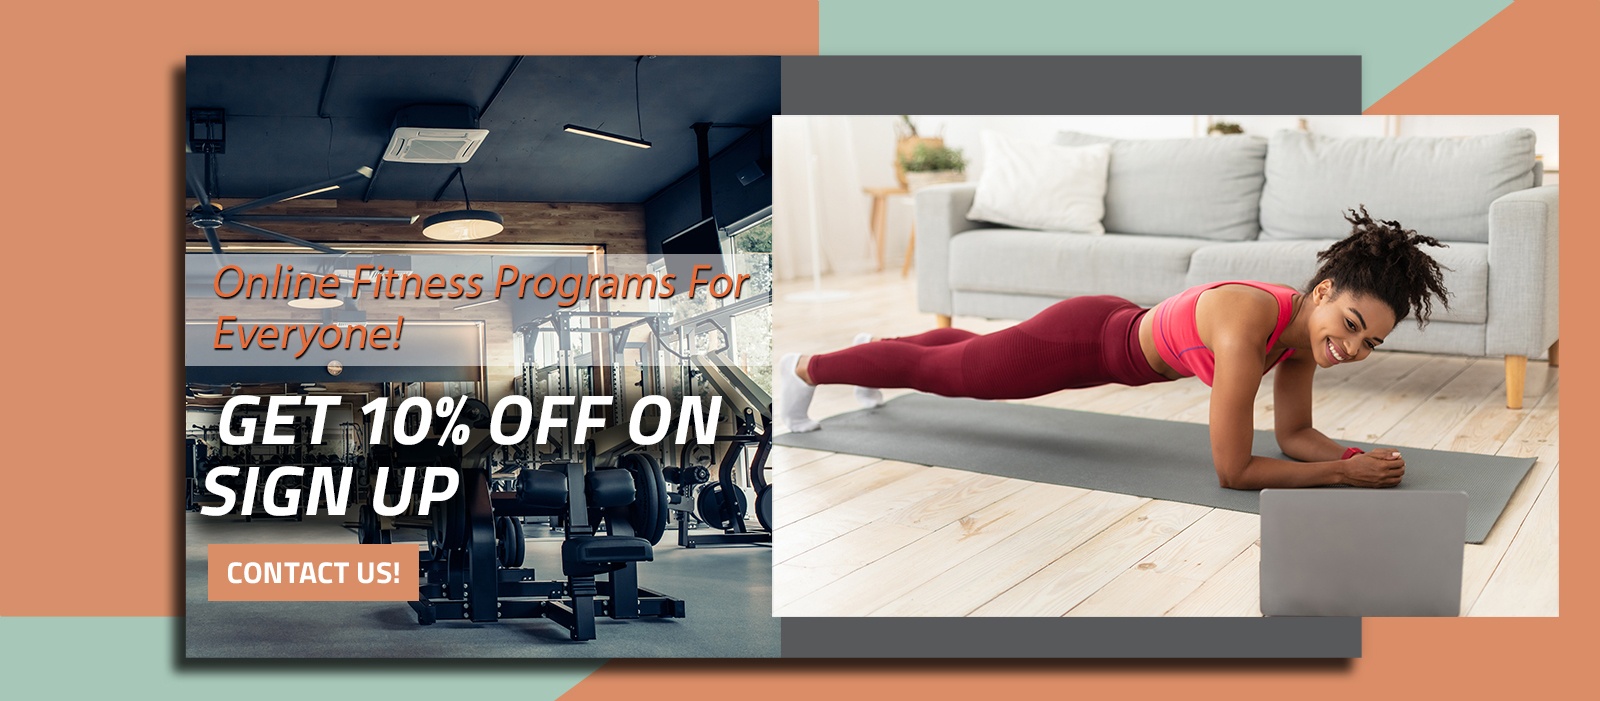 Online Fitness Programs For Everyone! Get 10% Off on Sign Up